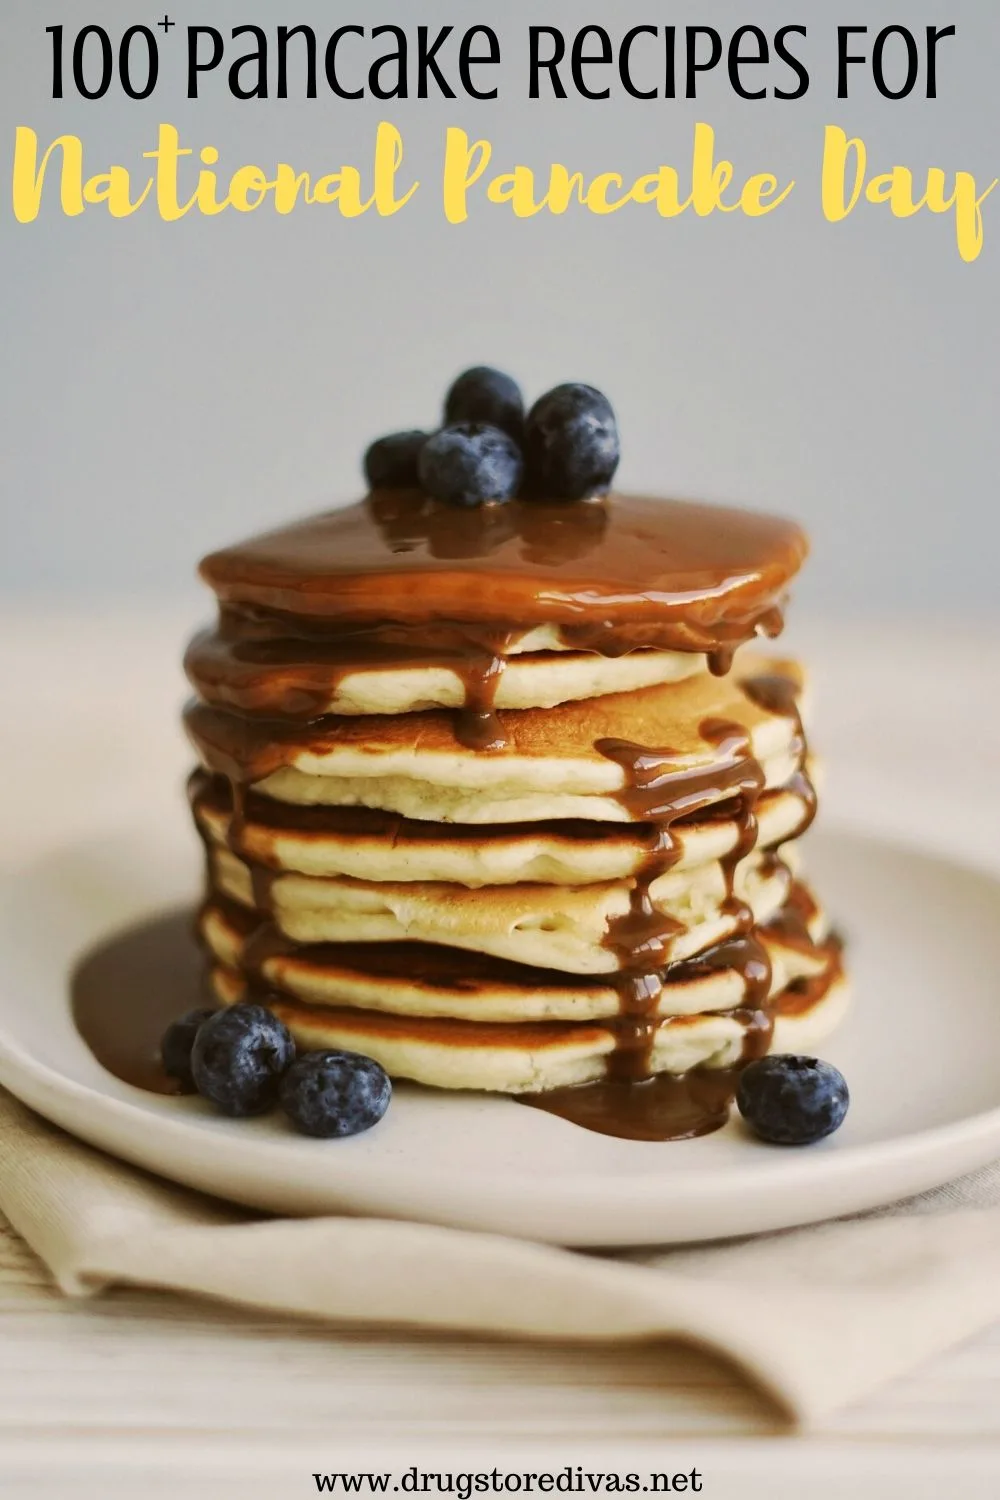 Pancake Day is upon us. Celebrate with one of these 100+ Pancakes Recipes For National Pancake Day from www.drugstoredivas.net.